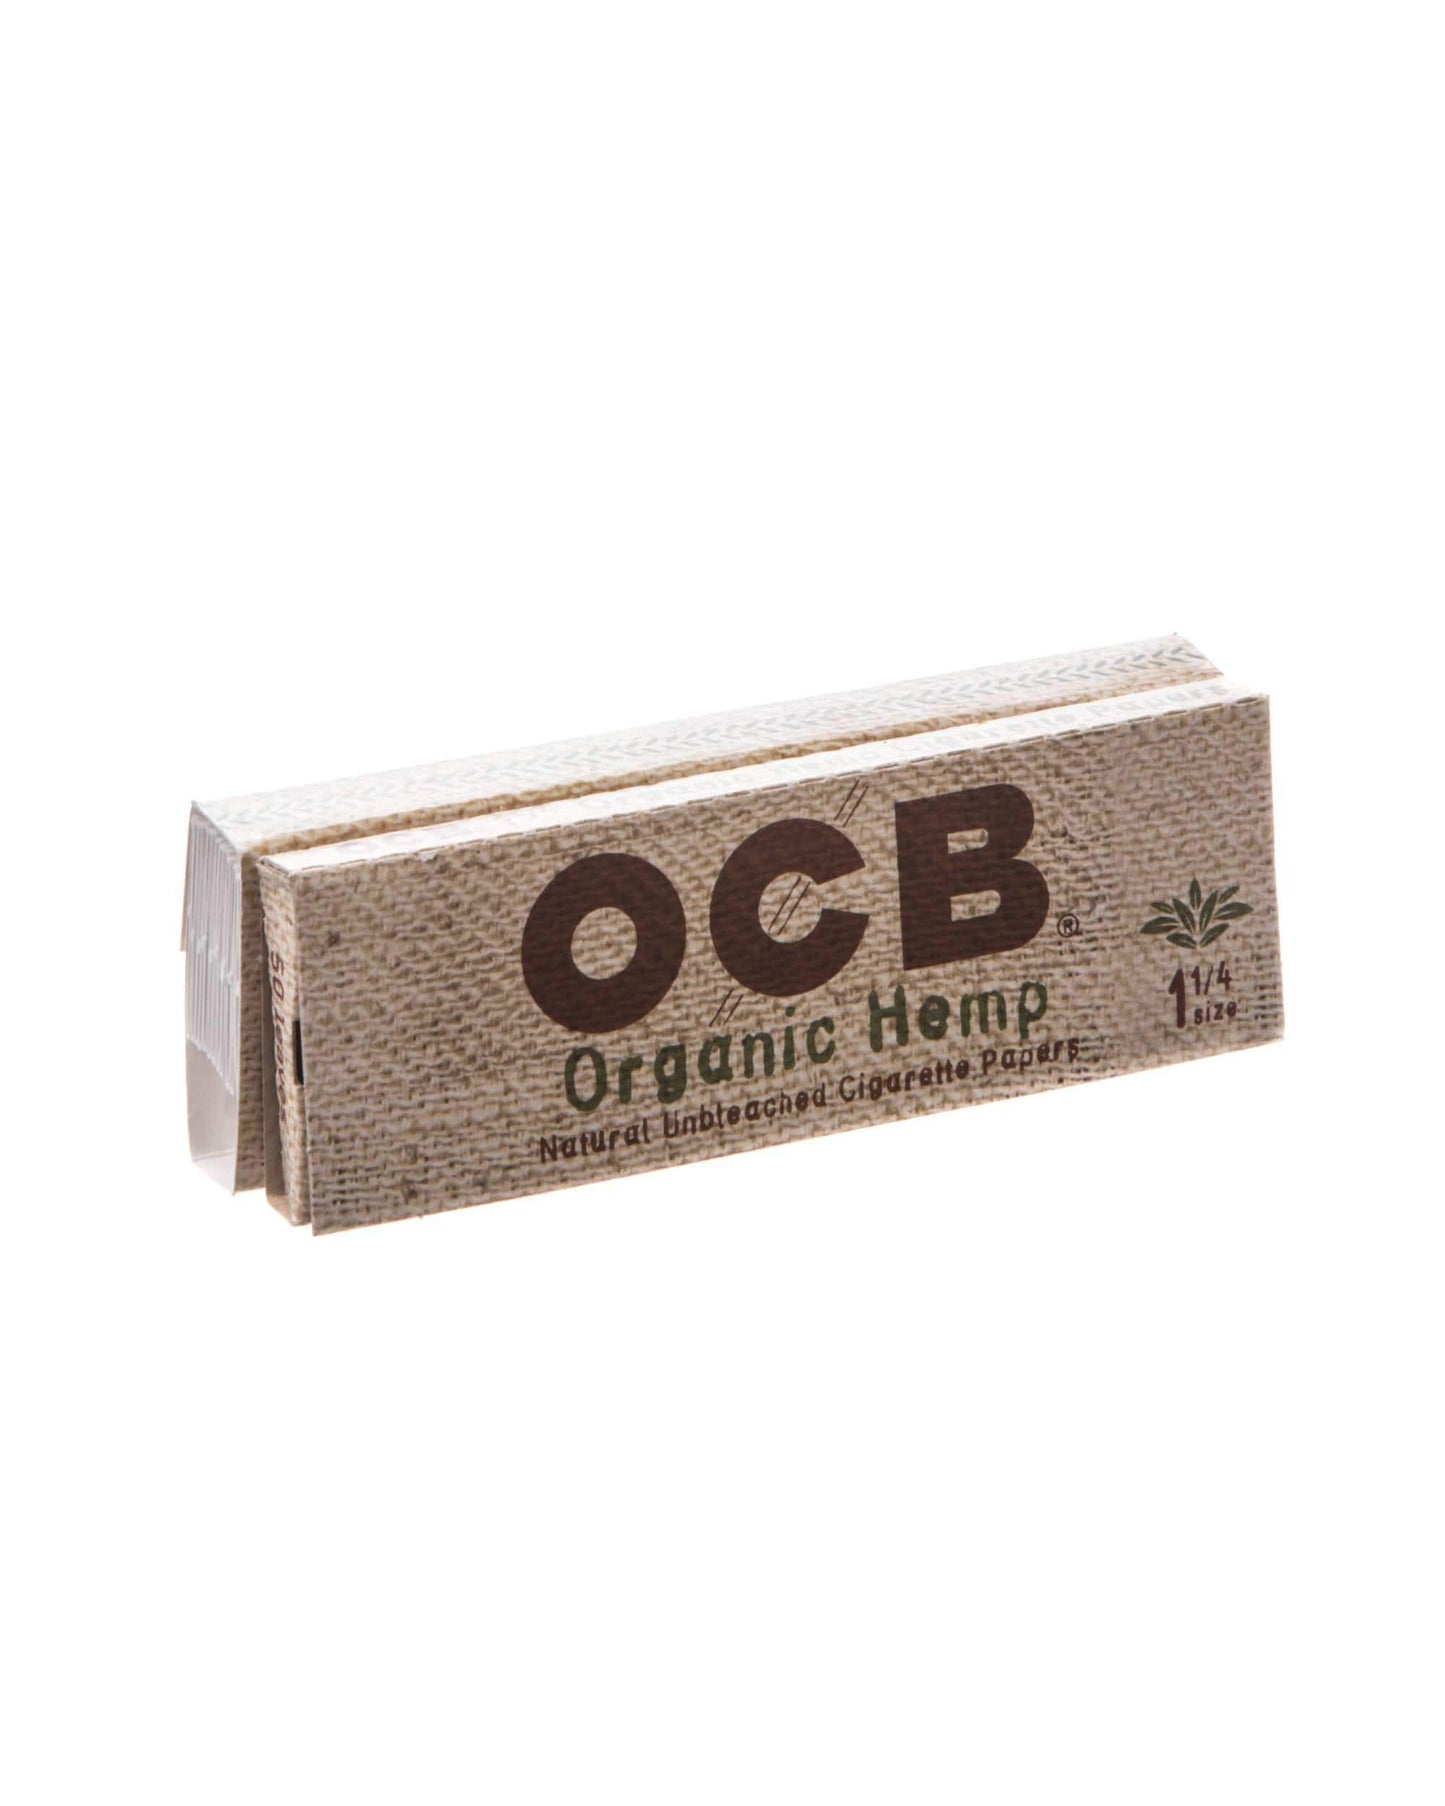 OCB rolling papers Yes / 1-1/4" / Single Pack Organic Hemp Rolling Papers